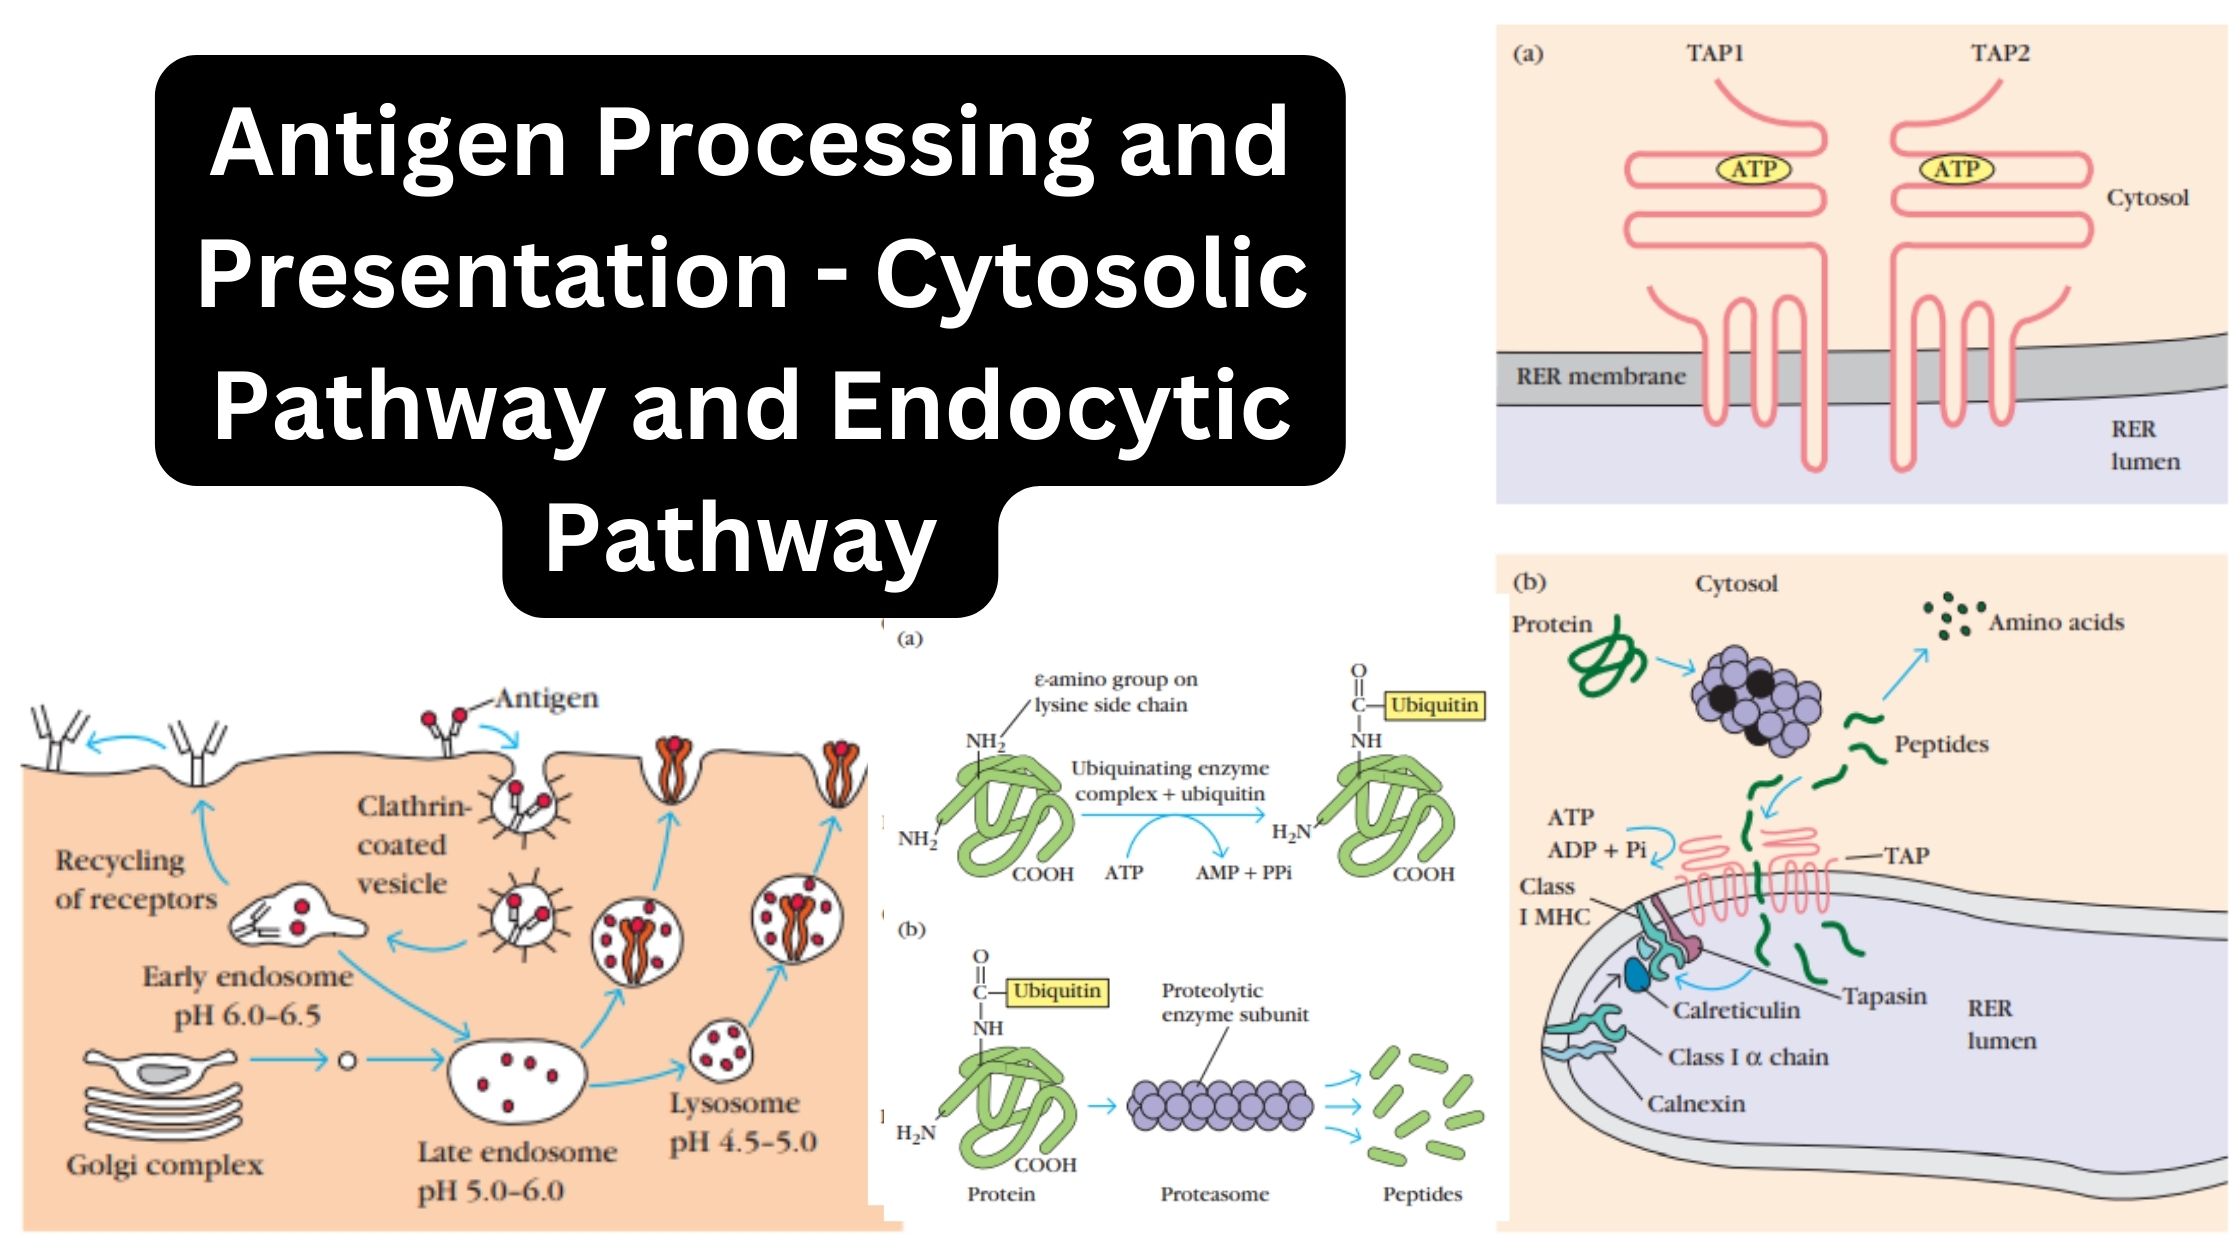 Antigen Processing and Presentation - Cytosolic Pathway and Endocytic Pathway 